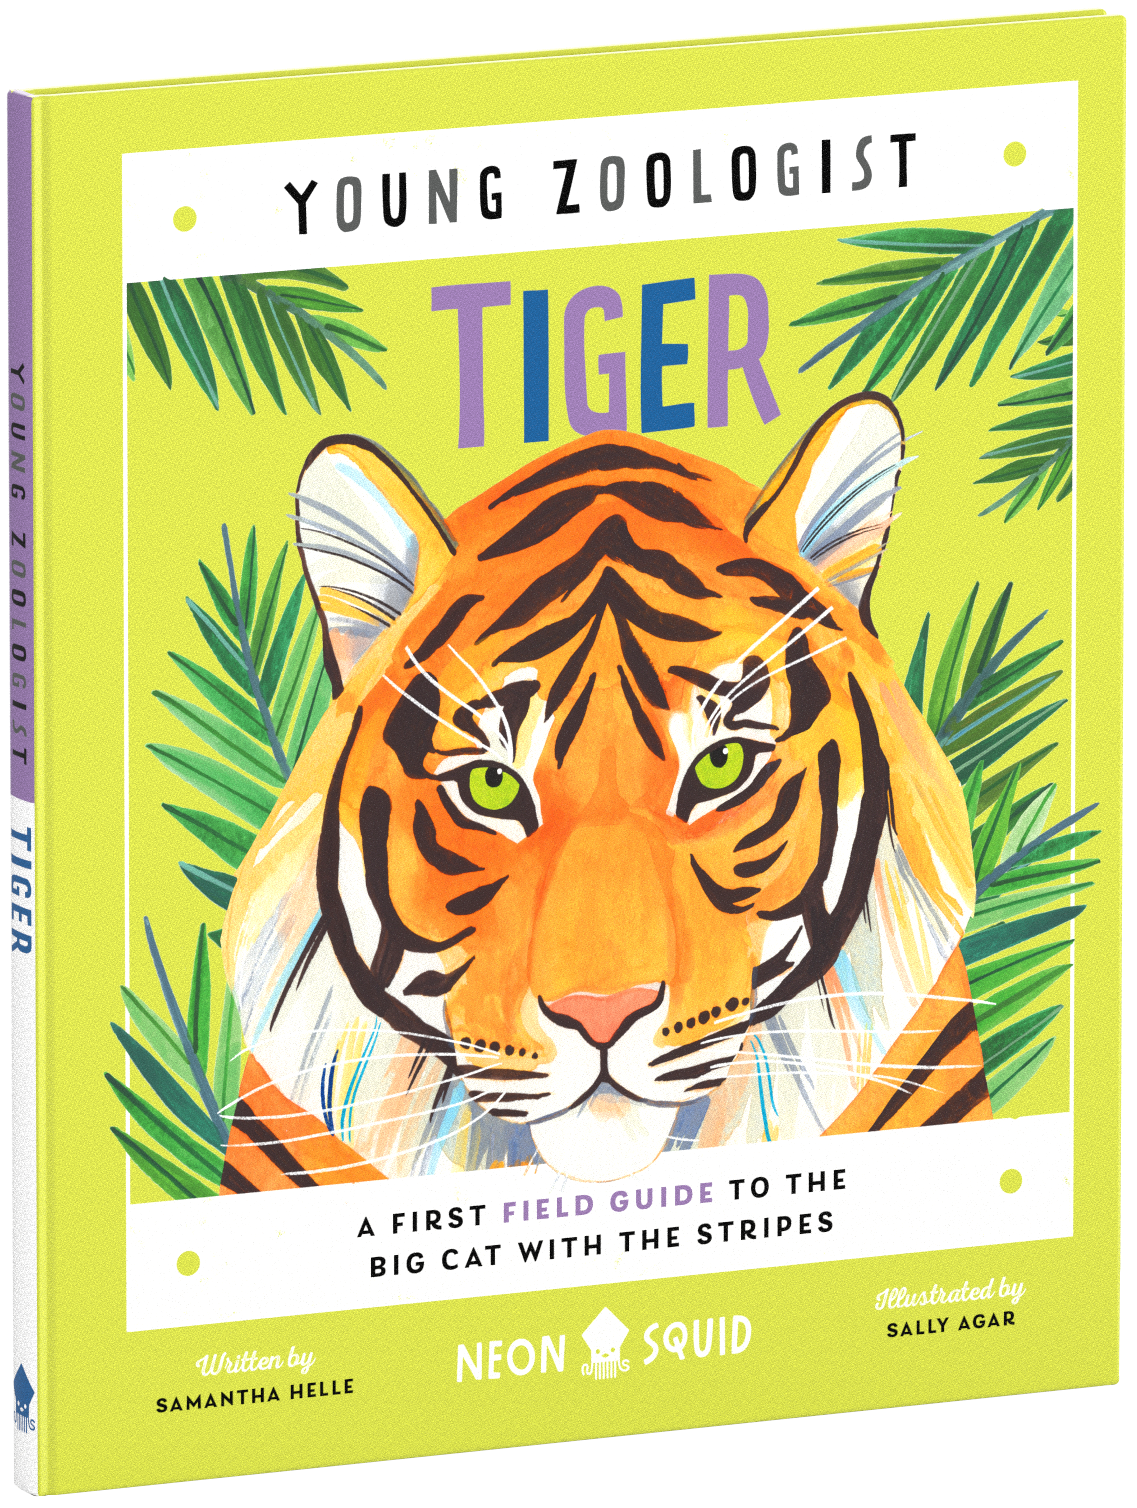 A vibrant book cover titled "young zoologist tiger," featuring a detailed illustration of a tiger's face surrounded by green palm leaves, authored by samantha helle and illustrated by sally agar.